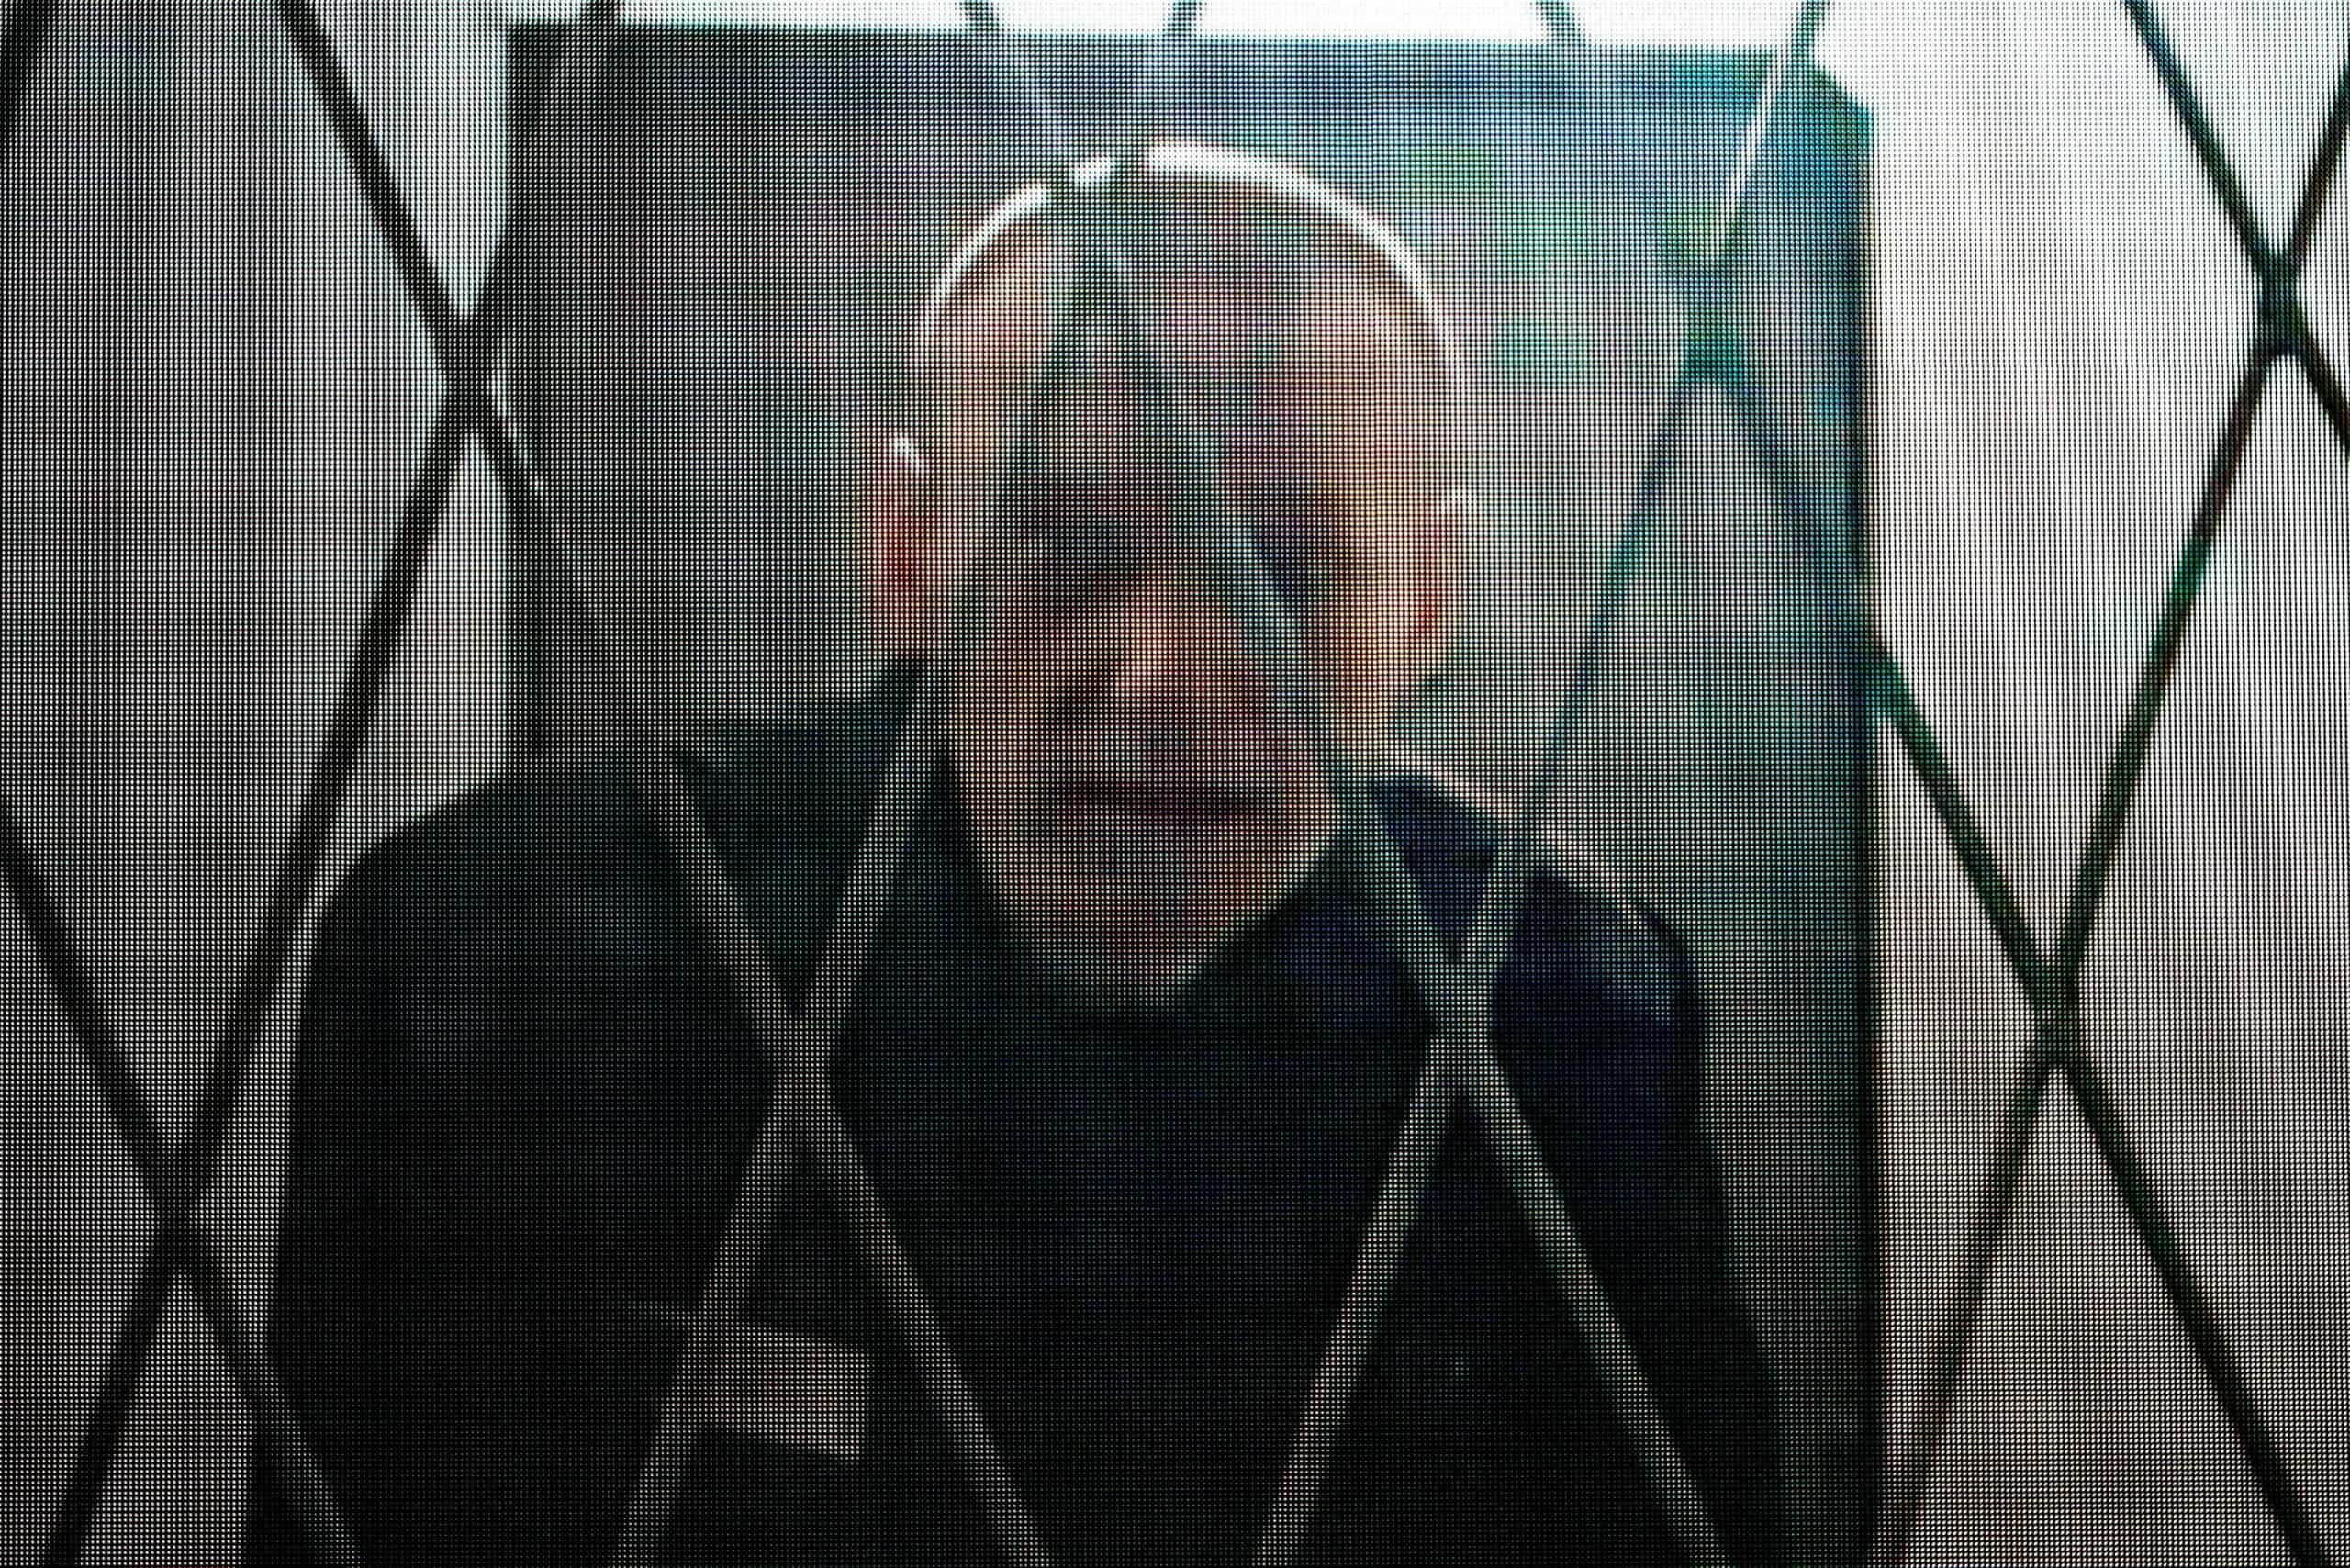 Footage of Navalny in prison the day before his death released